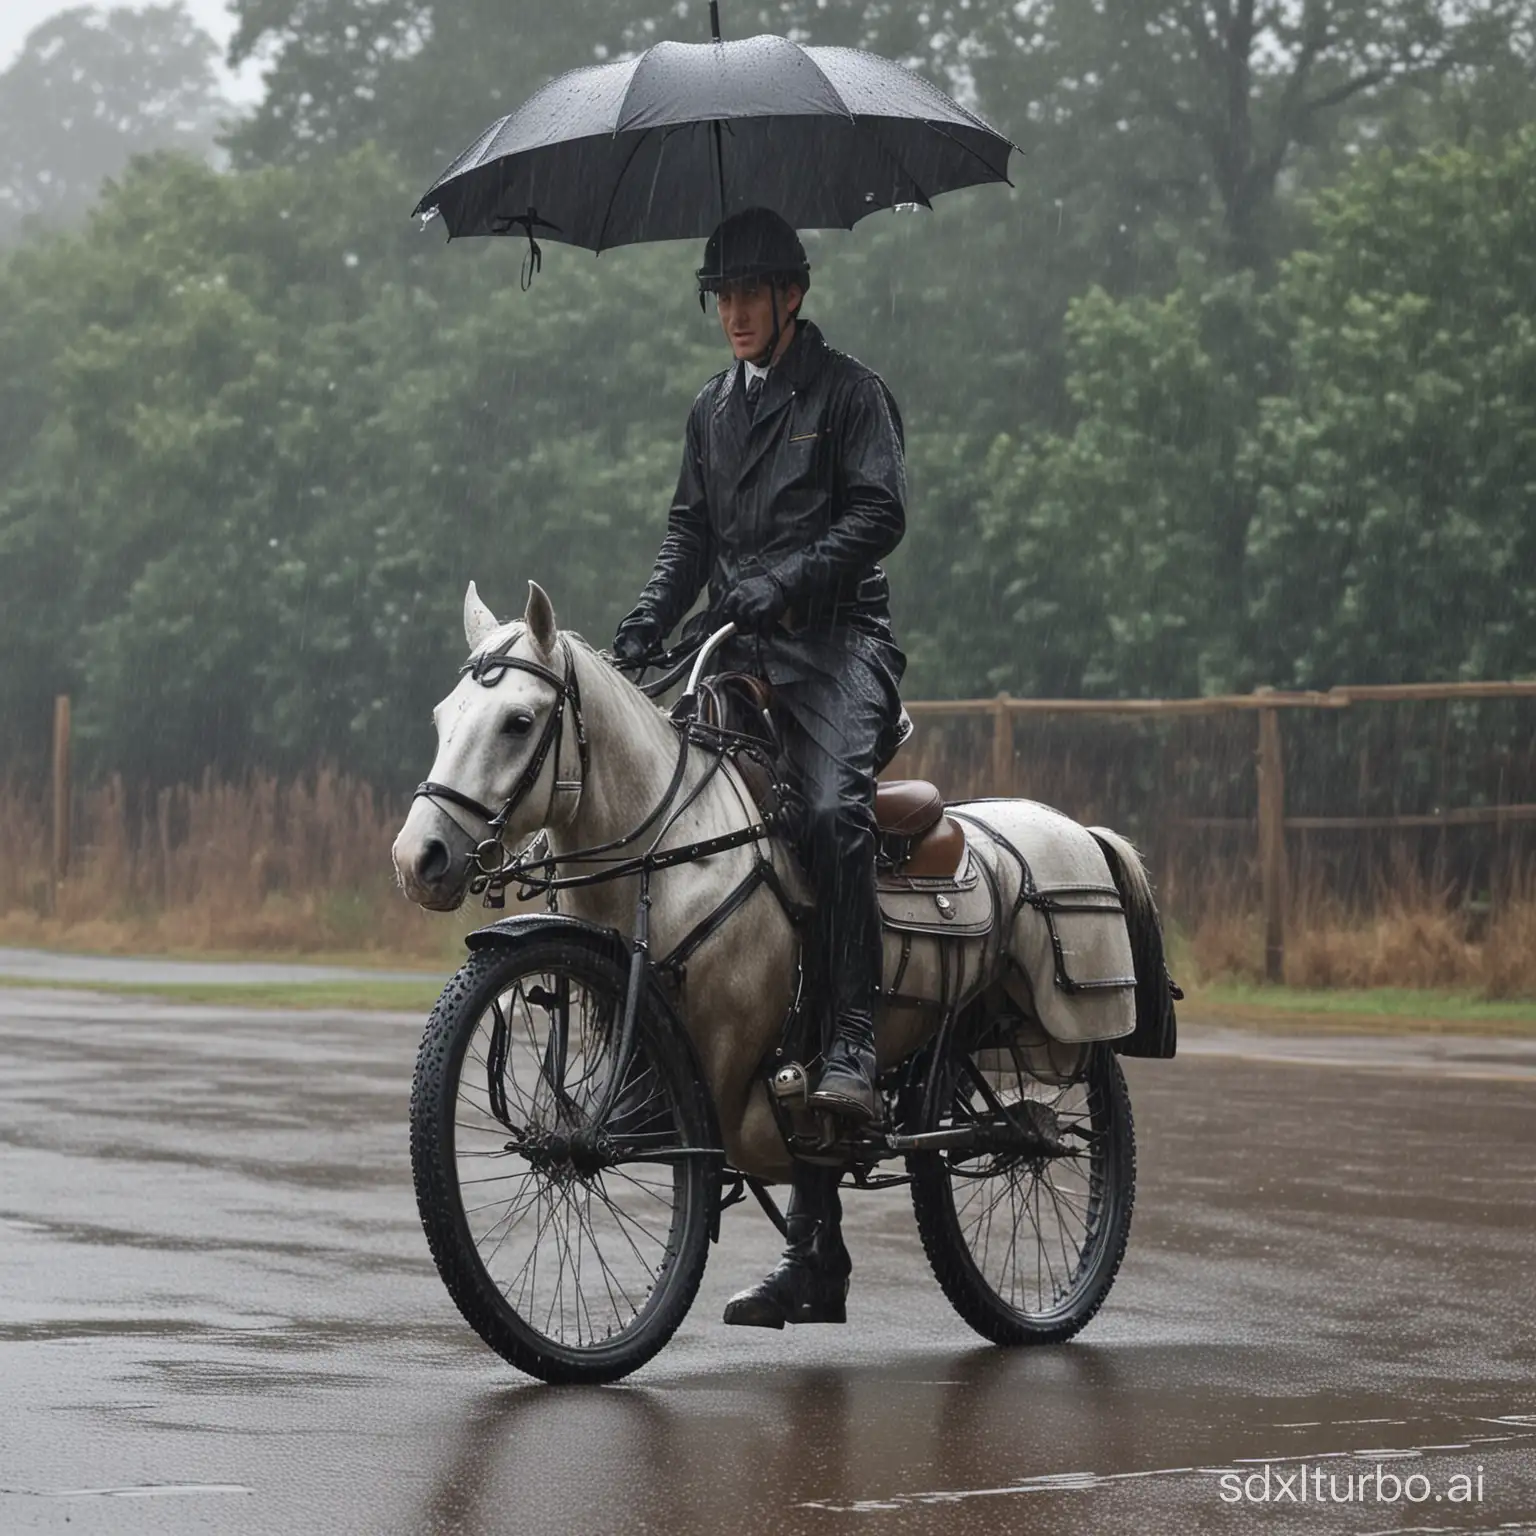 The steed standing in the rain.